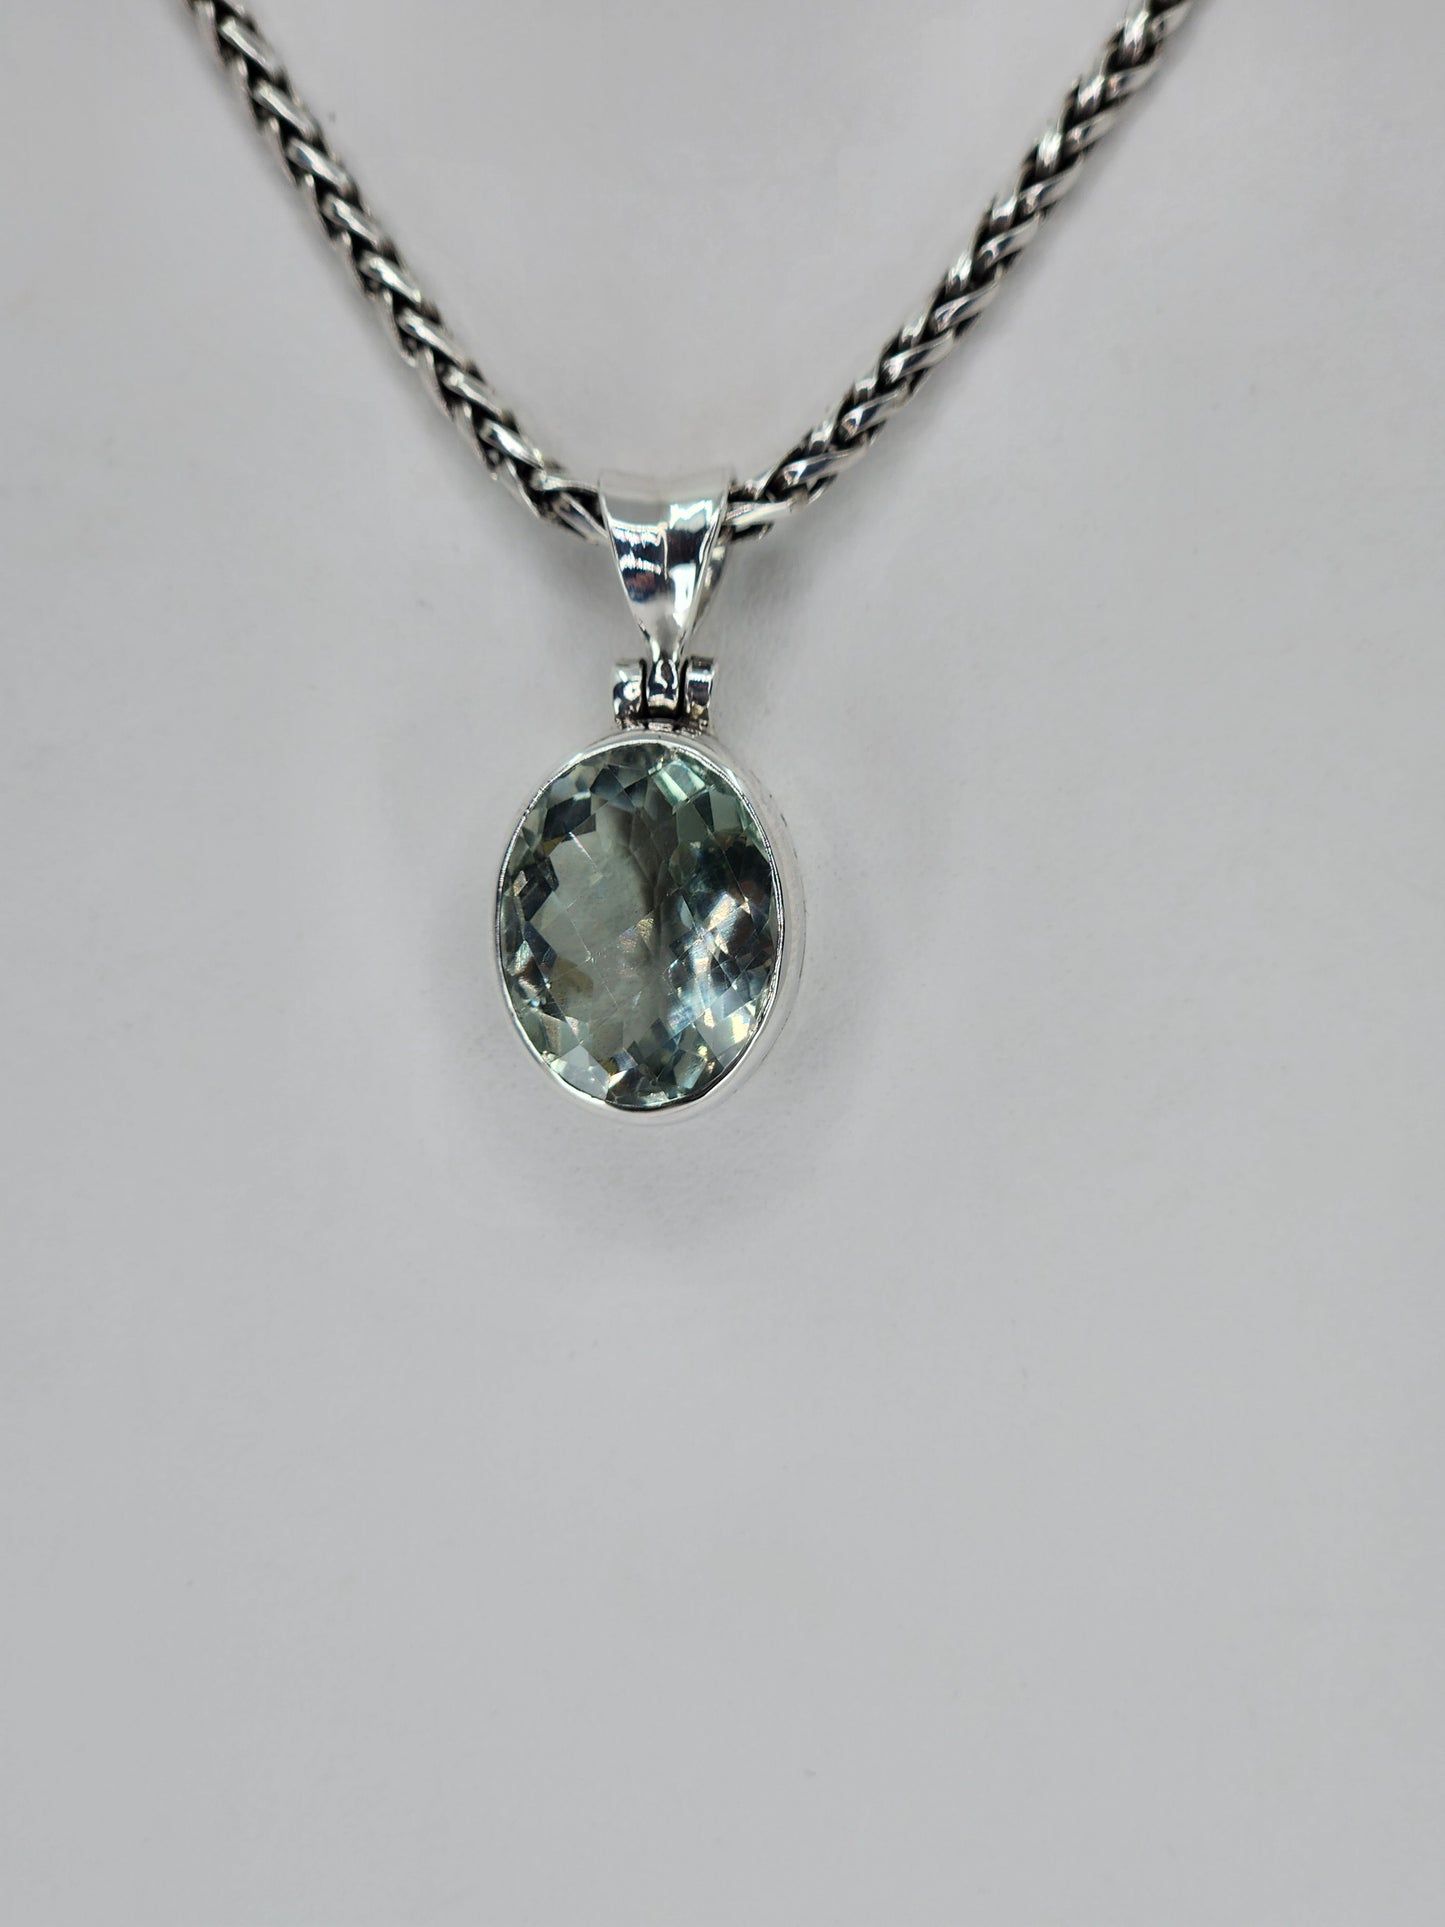 Janice Carson - Green Amethyst Oval Cut Pendant with Sterling Silver Necklace